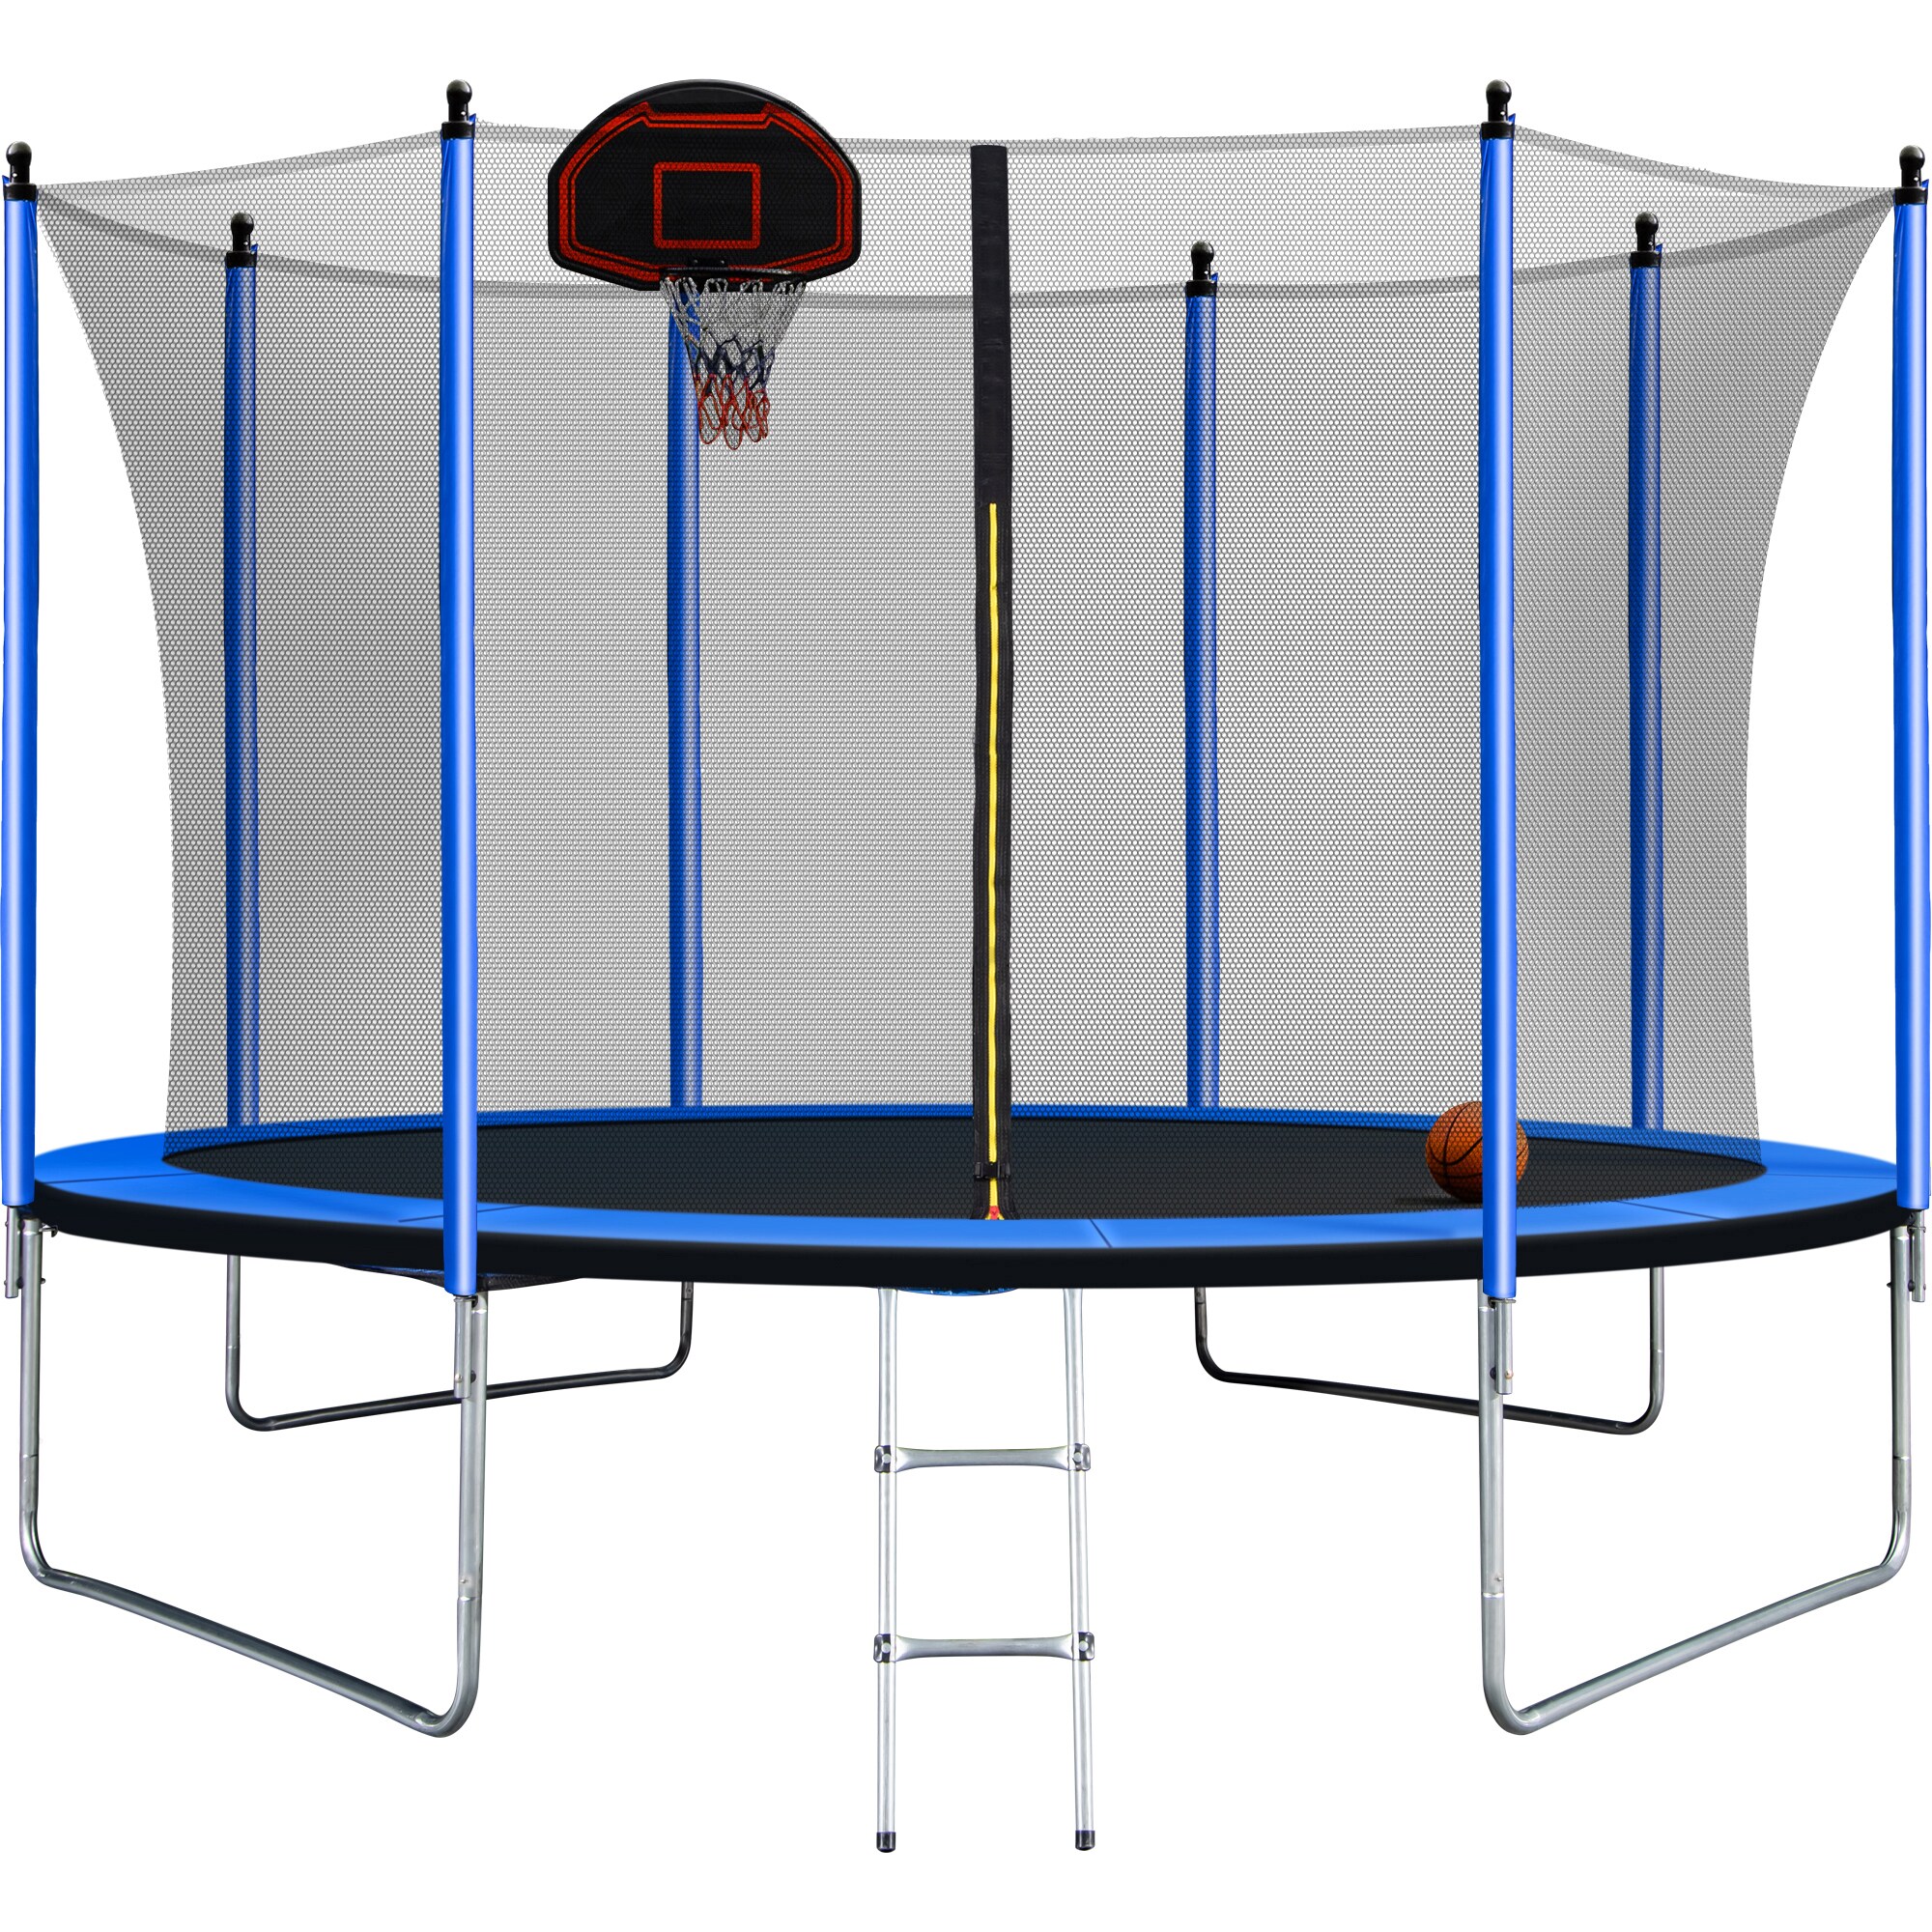 Afgeschaft kip tempo Maocao Hoom 10 ft. Round Backyard Trampoline with Safety Enclosure,  Basketball Hoop and Ladder in Blue in the Trampolines department at  Lowes.com